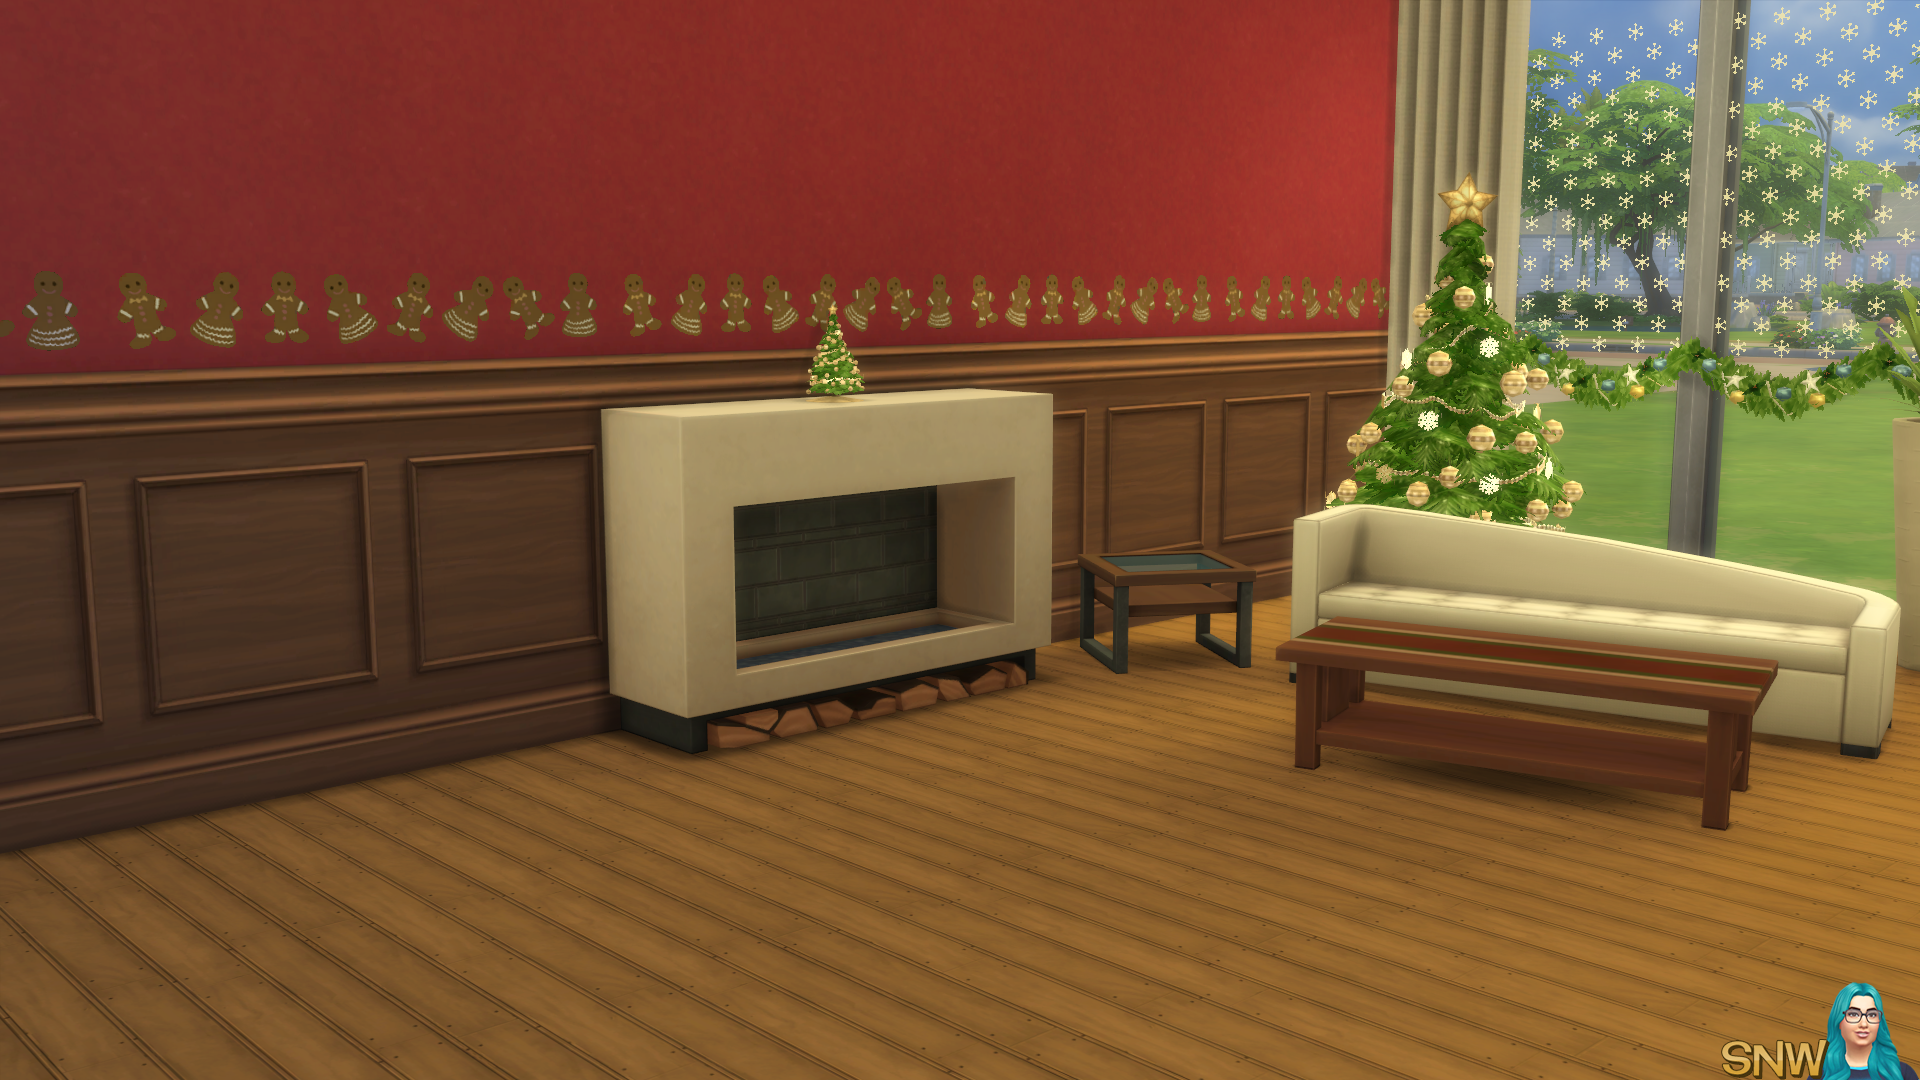 Christmas 2015 Decals and Borders